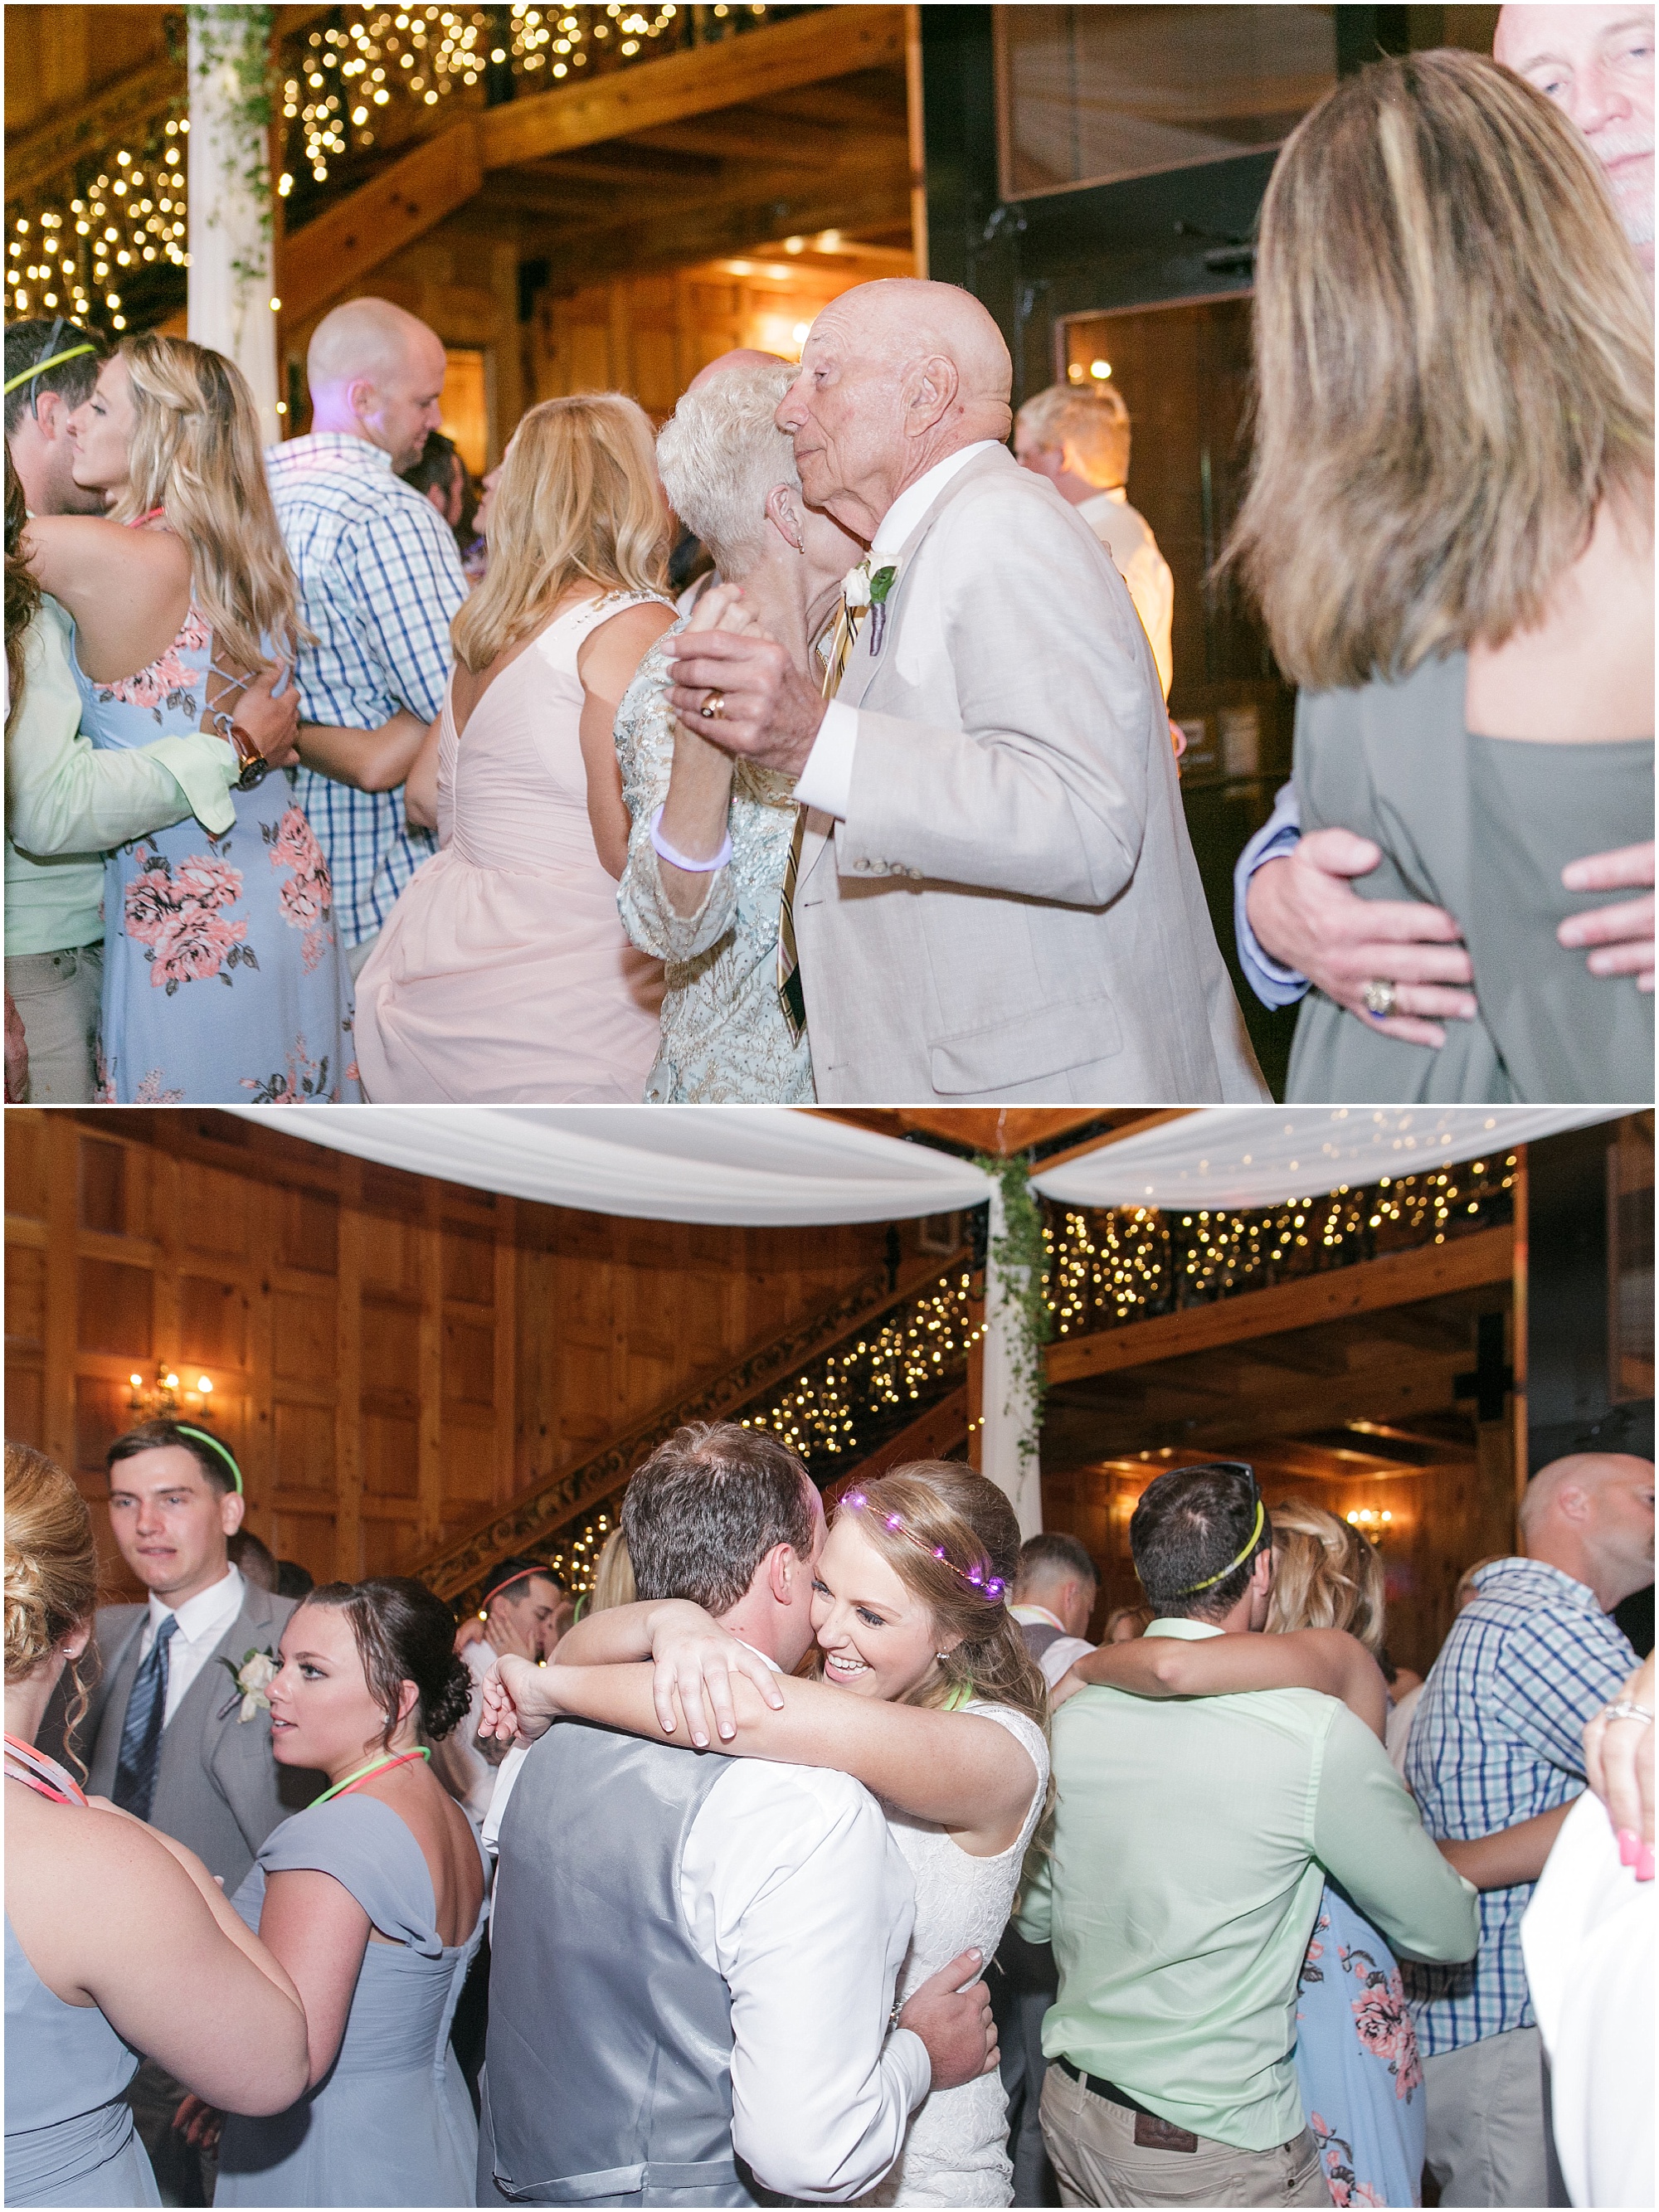 Older couple and the newlywed couple slow dancing at wedding.